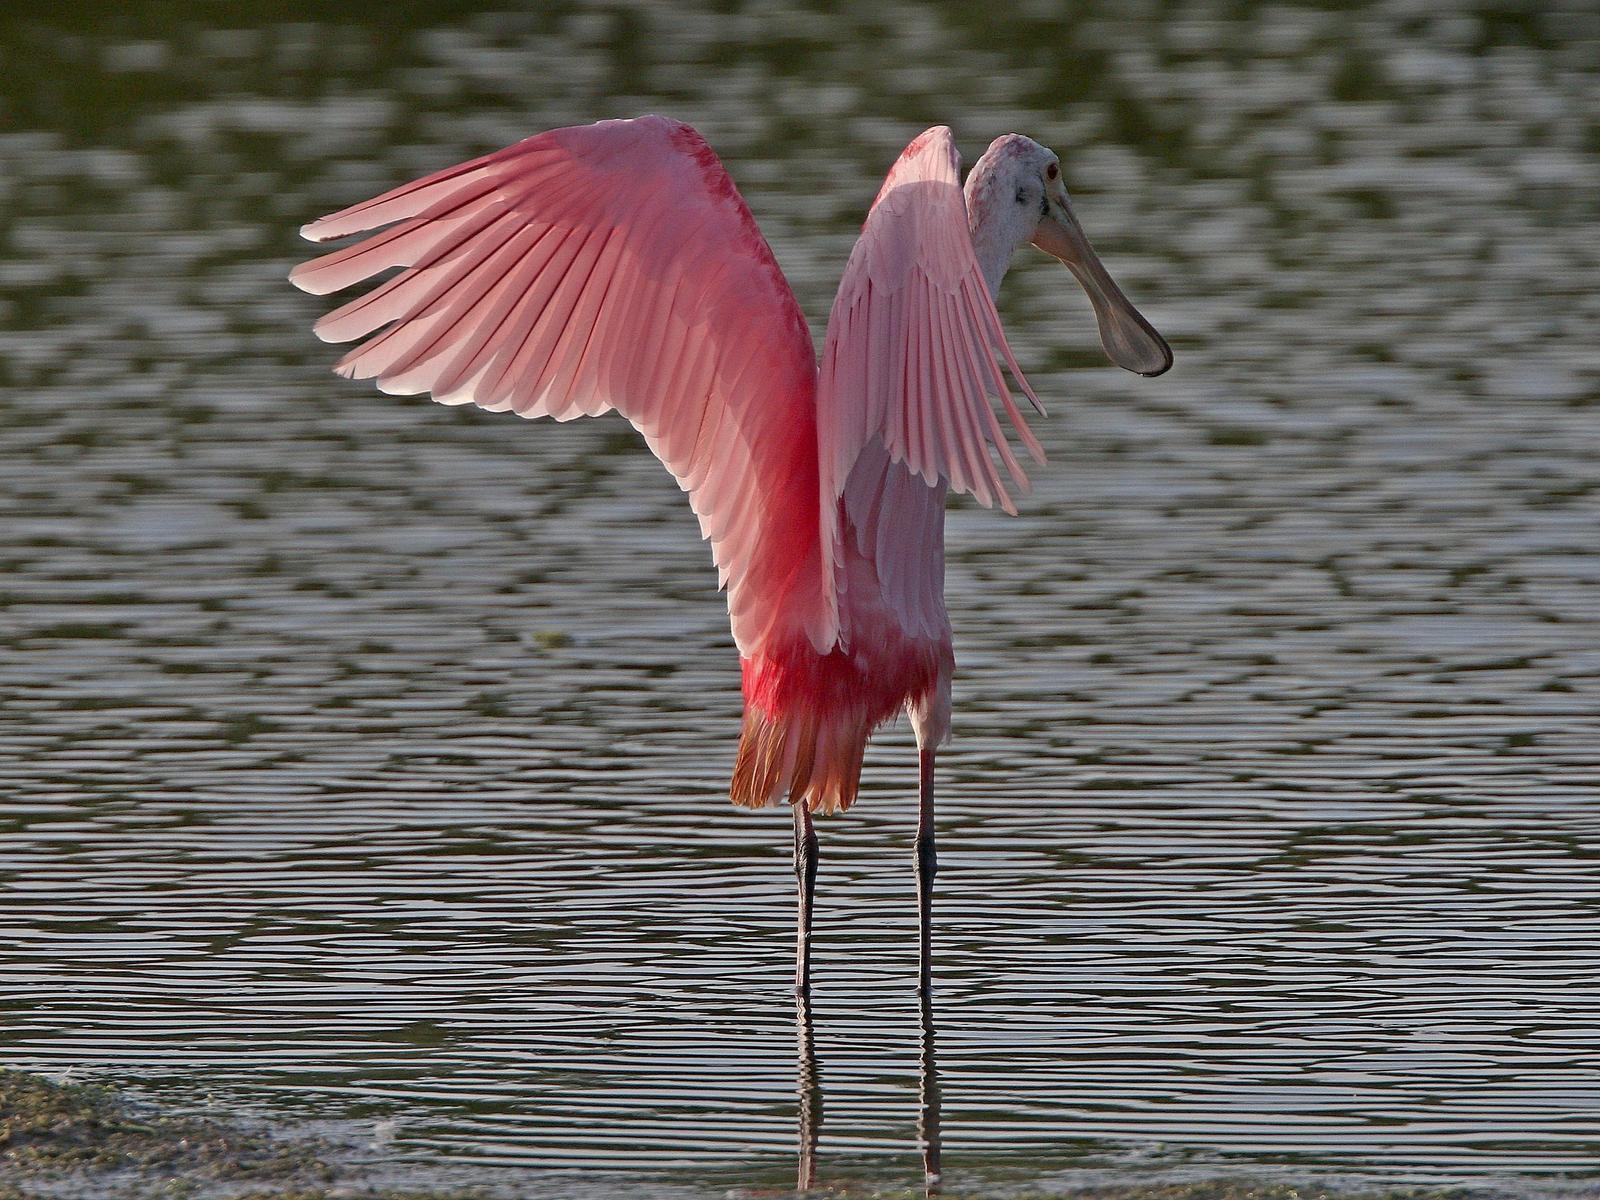 Roseate Spoonbill Photo by Michael Blust